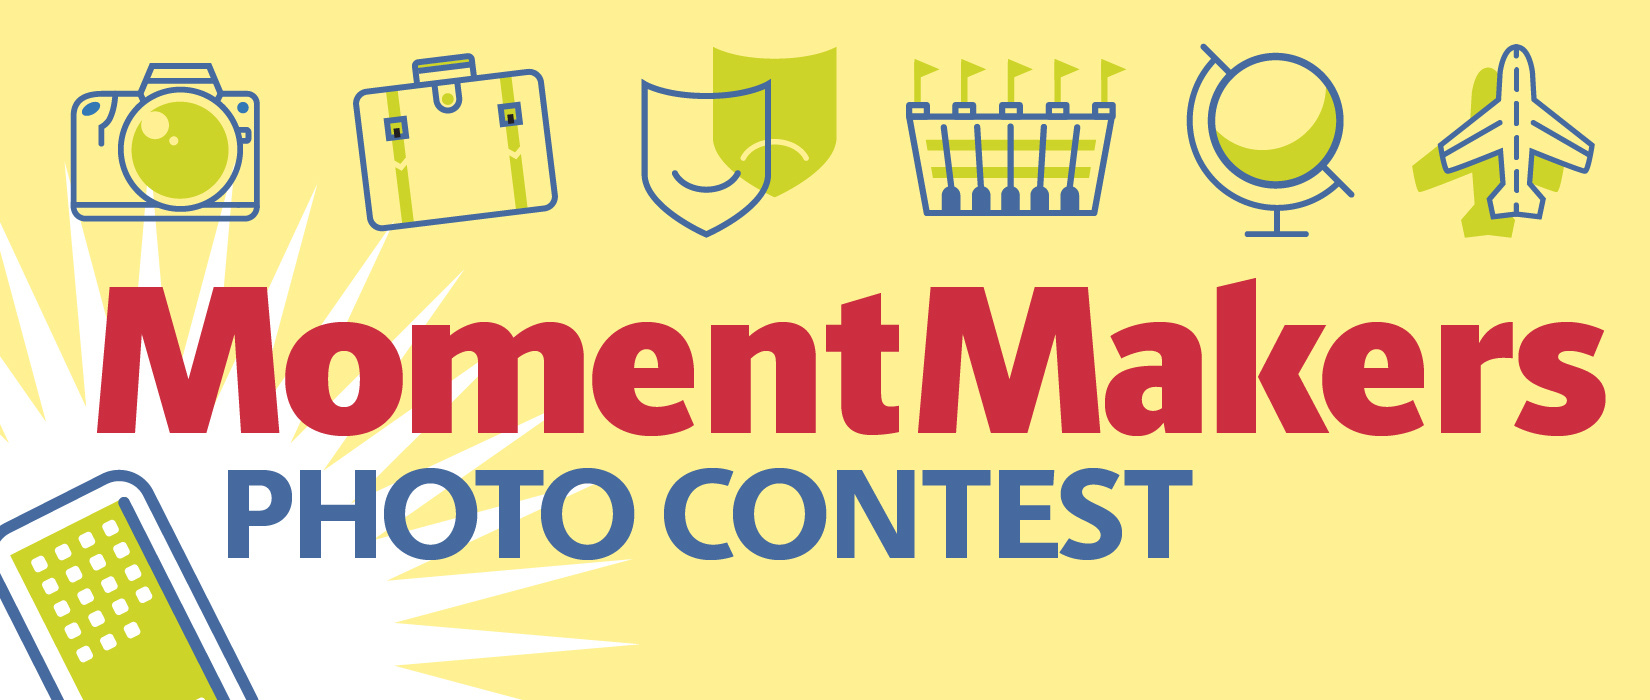 Enter the Moment Makers Photo Contest!